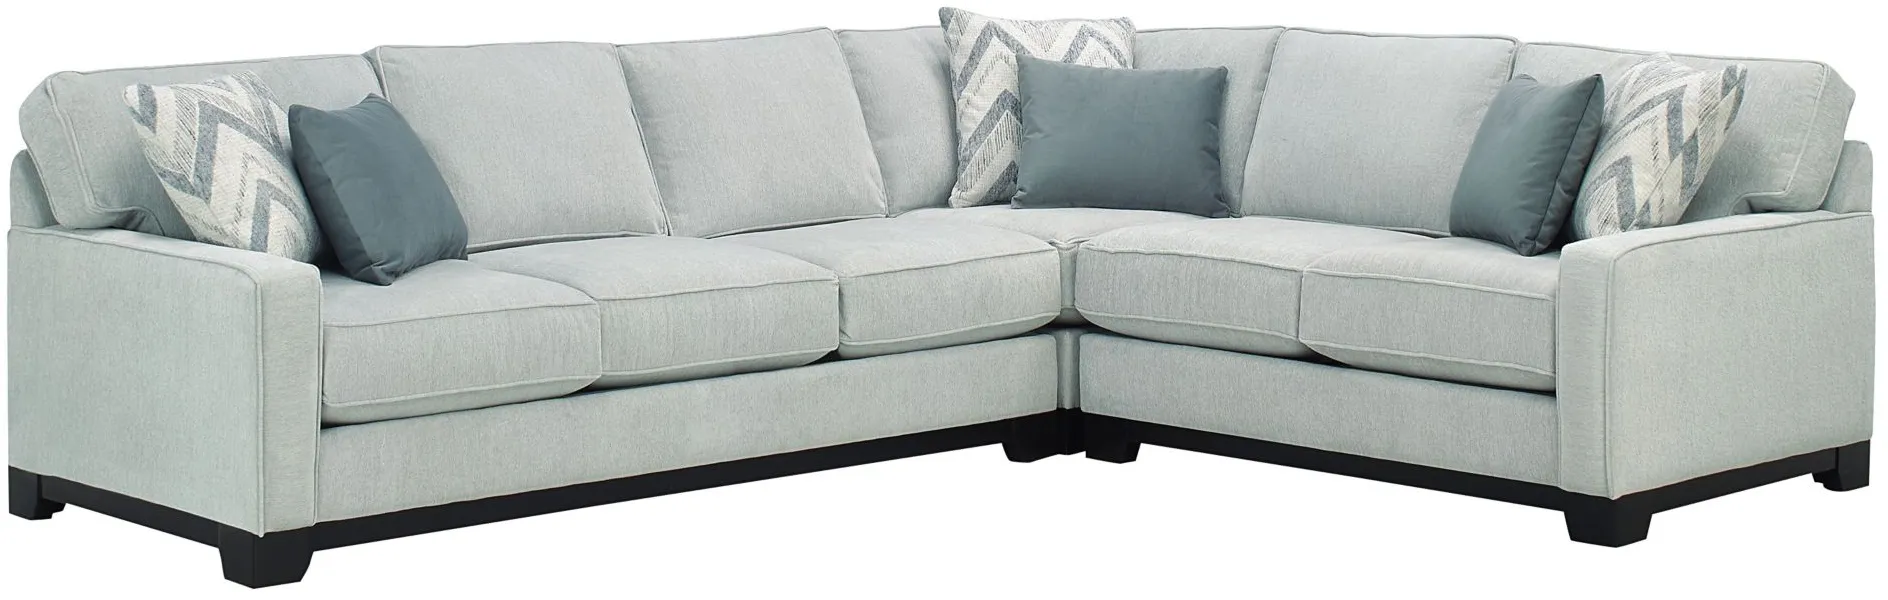 Arlo 3-pc. Sectional Sofa in Suede Dove by Jonathan Louis